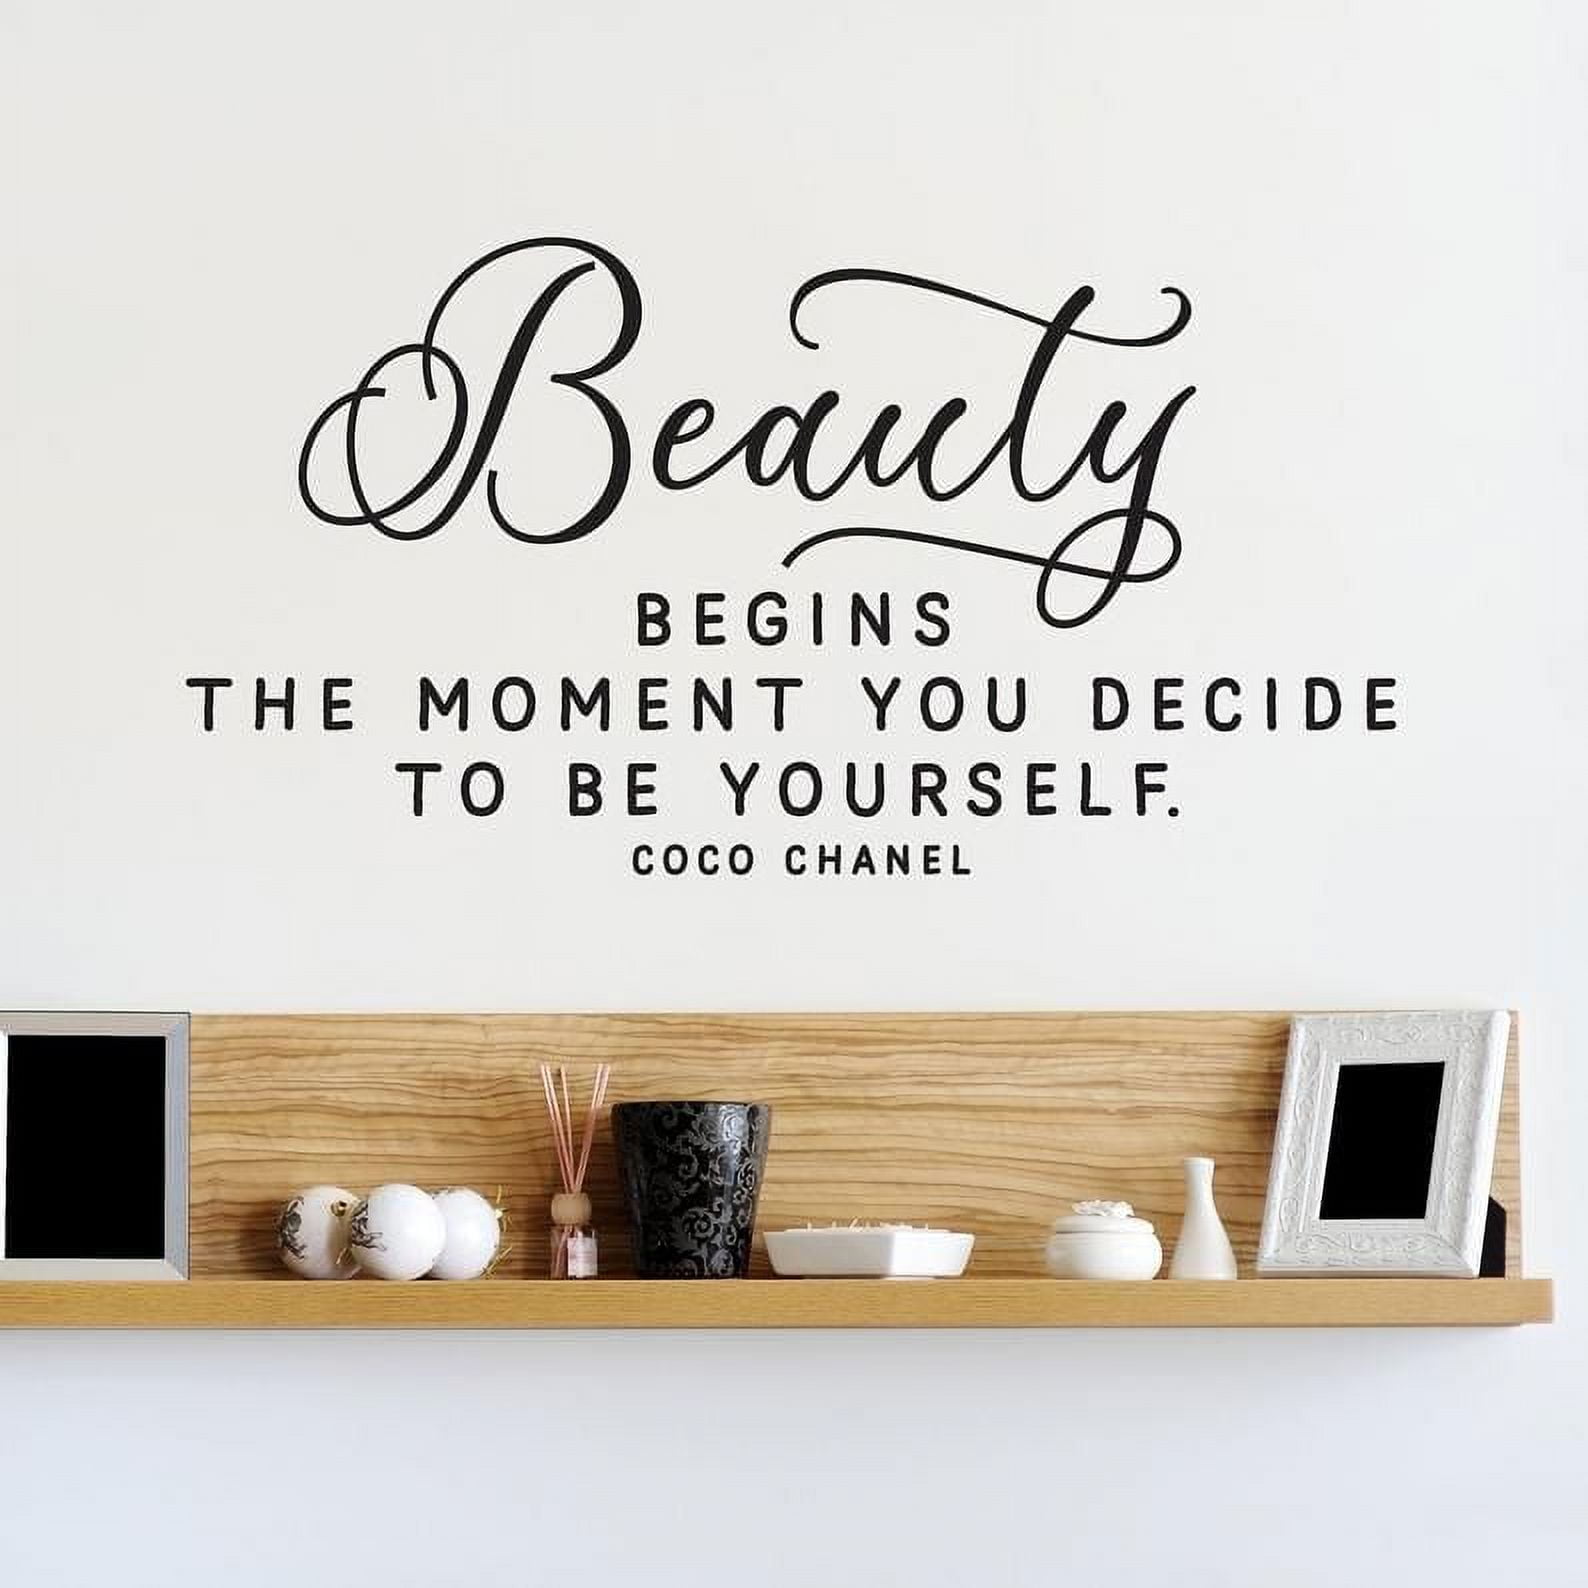 Vinyl Wall Art Decal - Beauty Begins The Moment You Decide To Be Yourself  22 x 11.5 